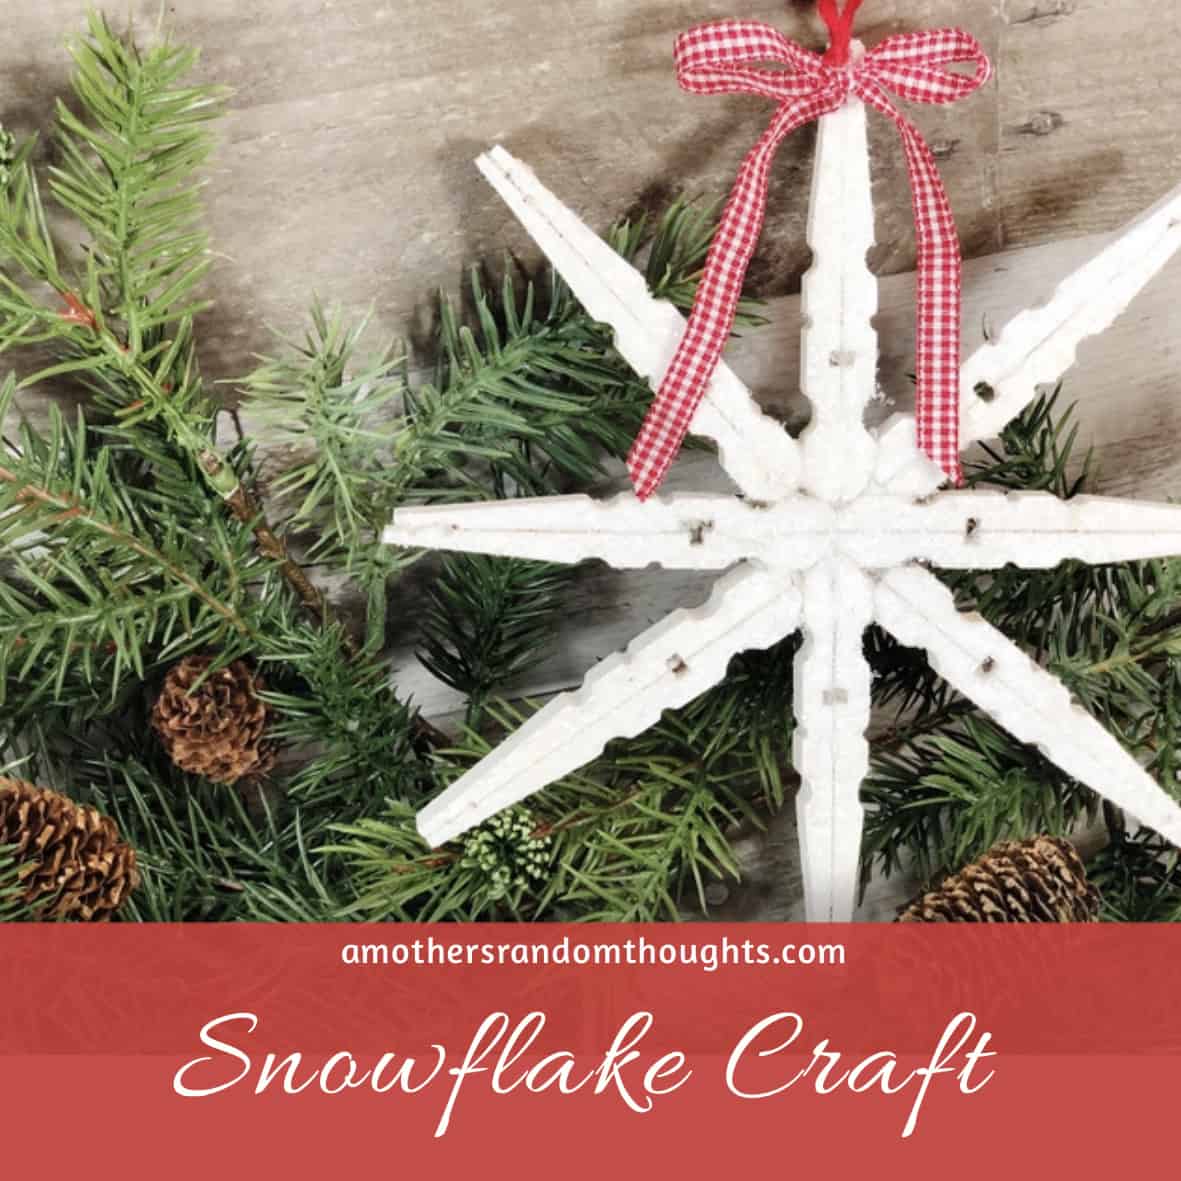 Snowflake craft for pinterest